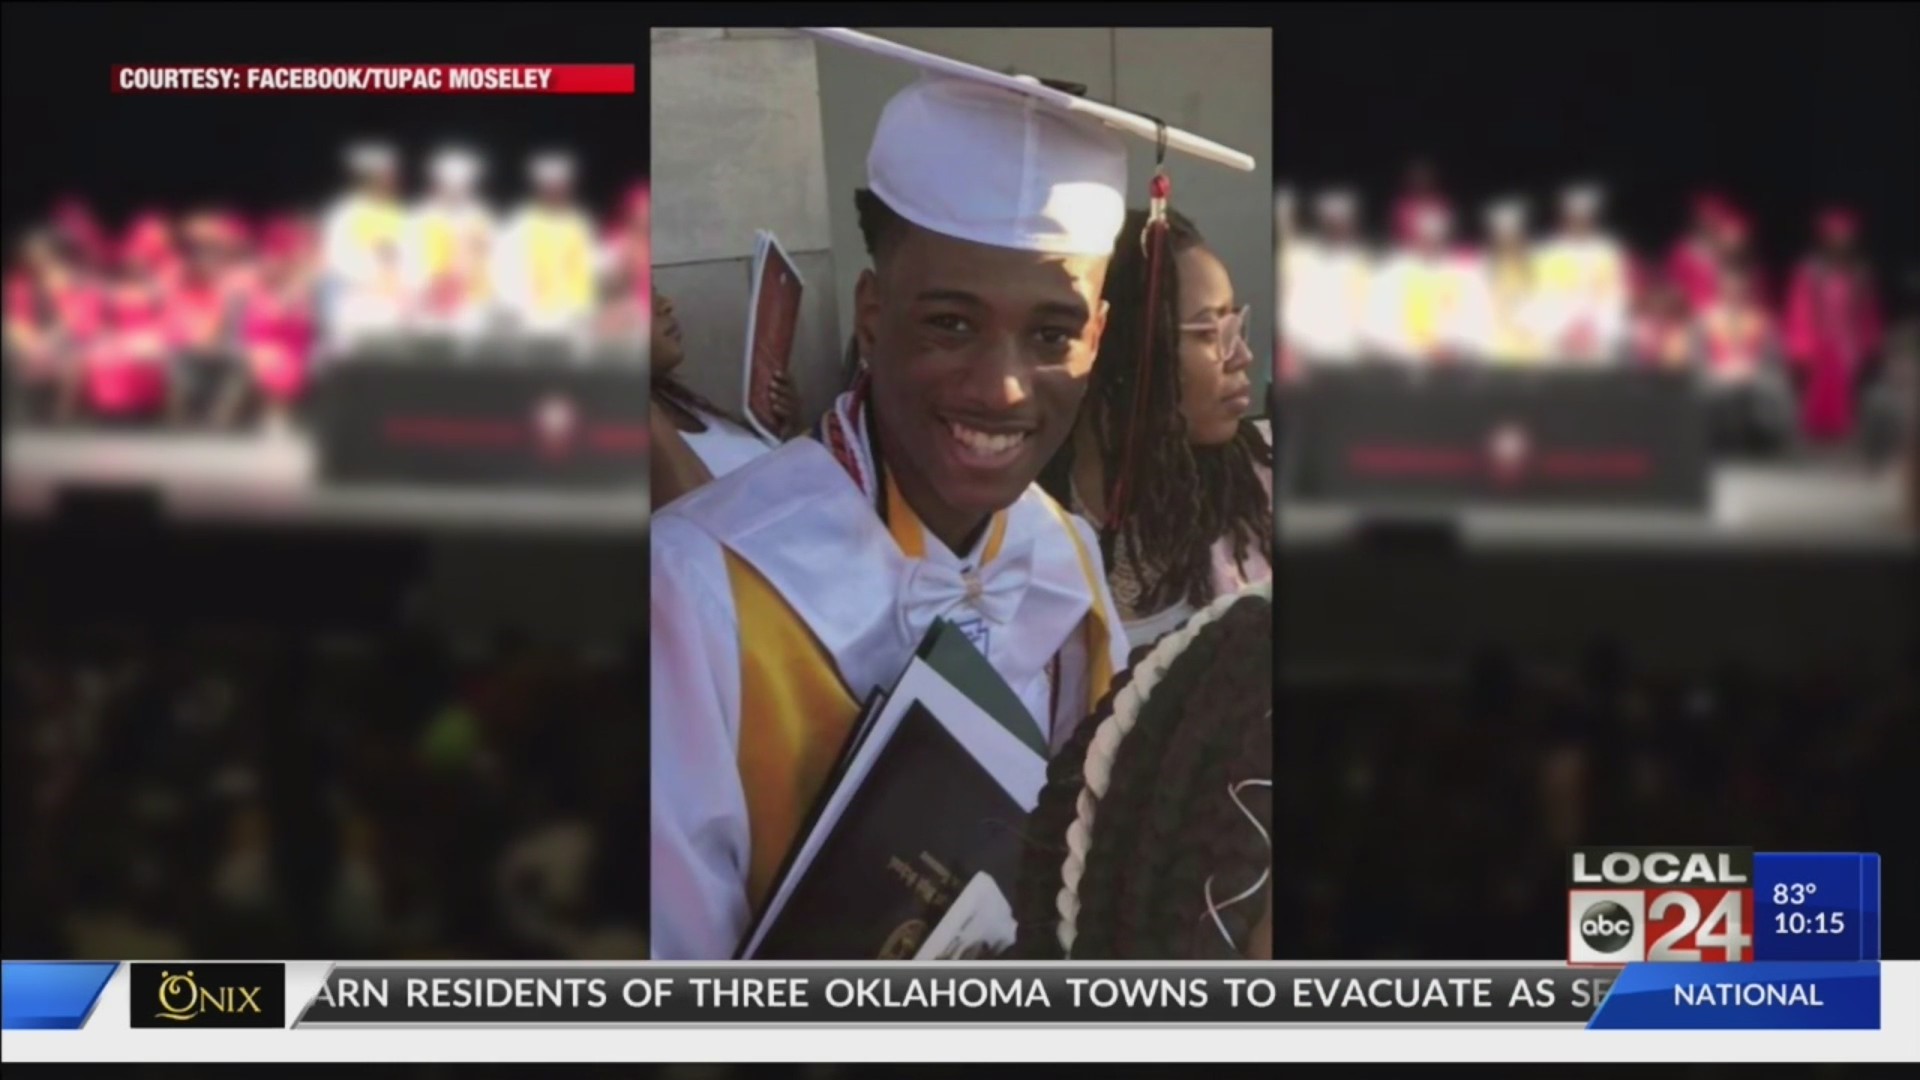 Homeless valedictorian earns $3 million in scholarships, awarded free college housing and meal plan